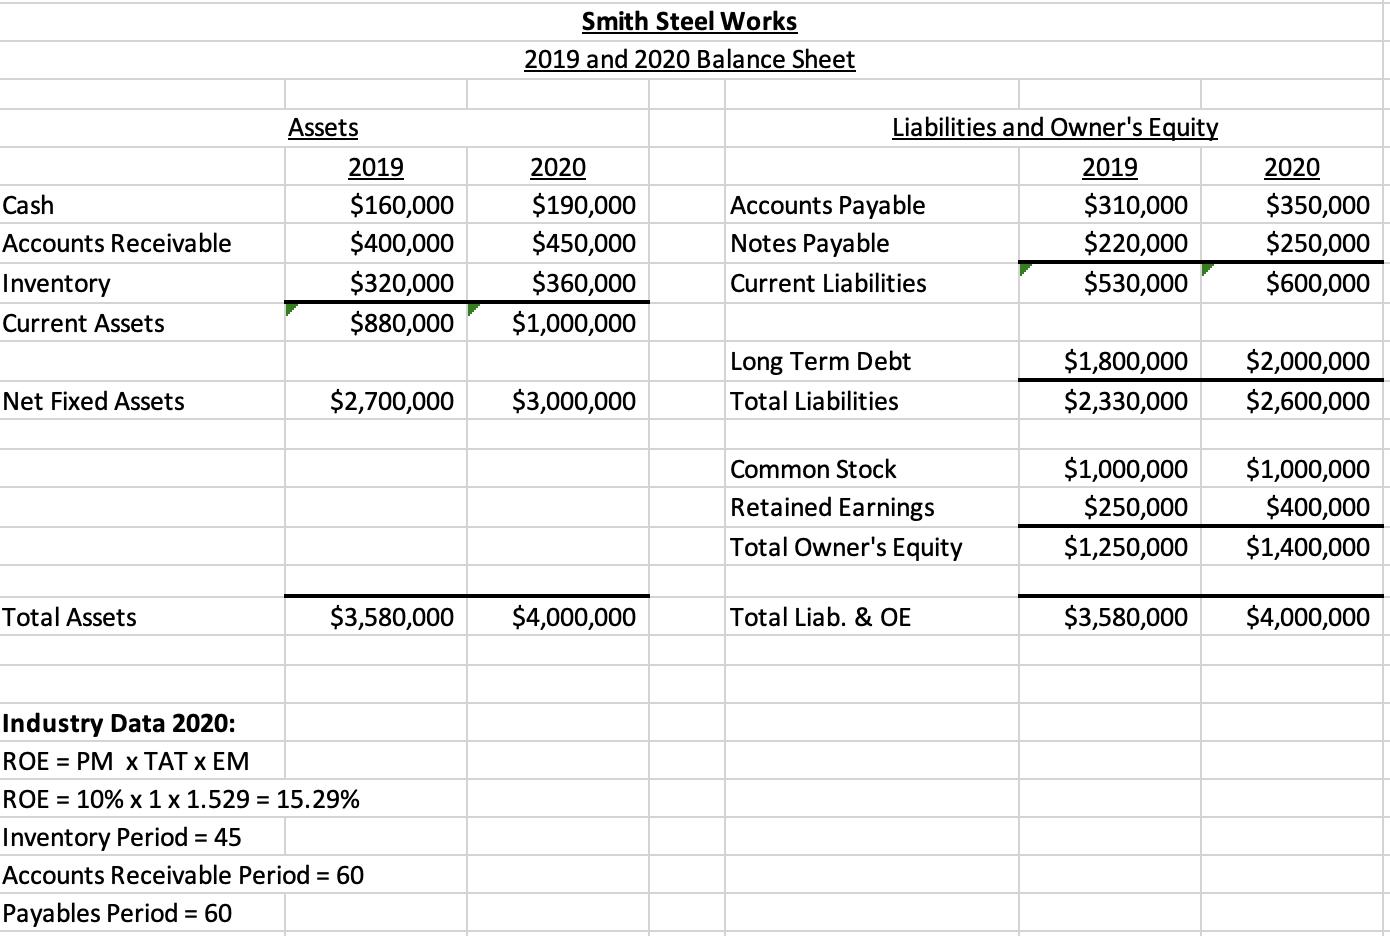 Smith Steel Works2019 and 2020 Balance SheetCashAccounts ReceivableAssets2019$160,000$400,000$320,000$880,0002020$